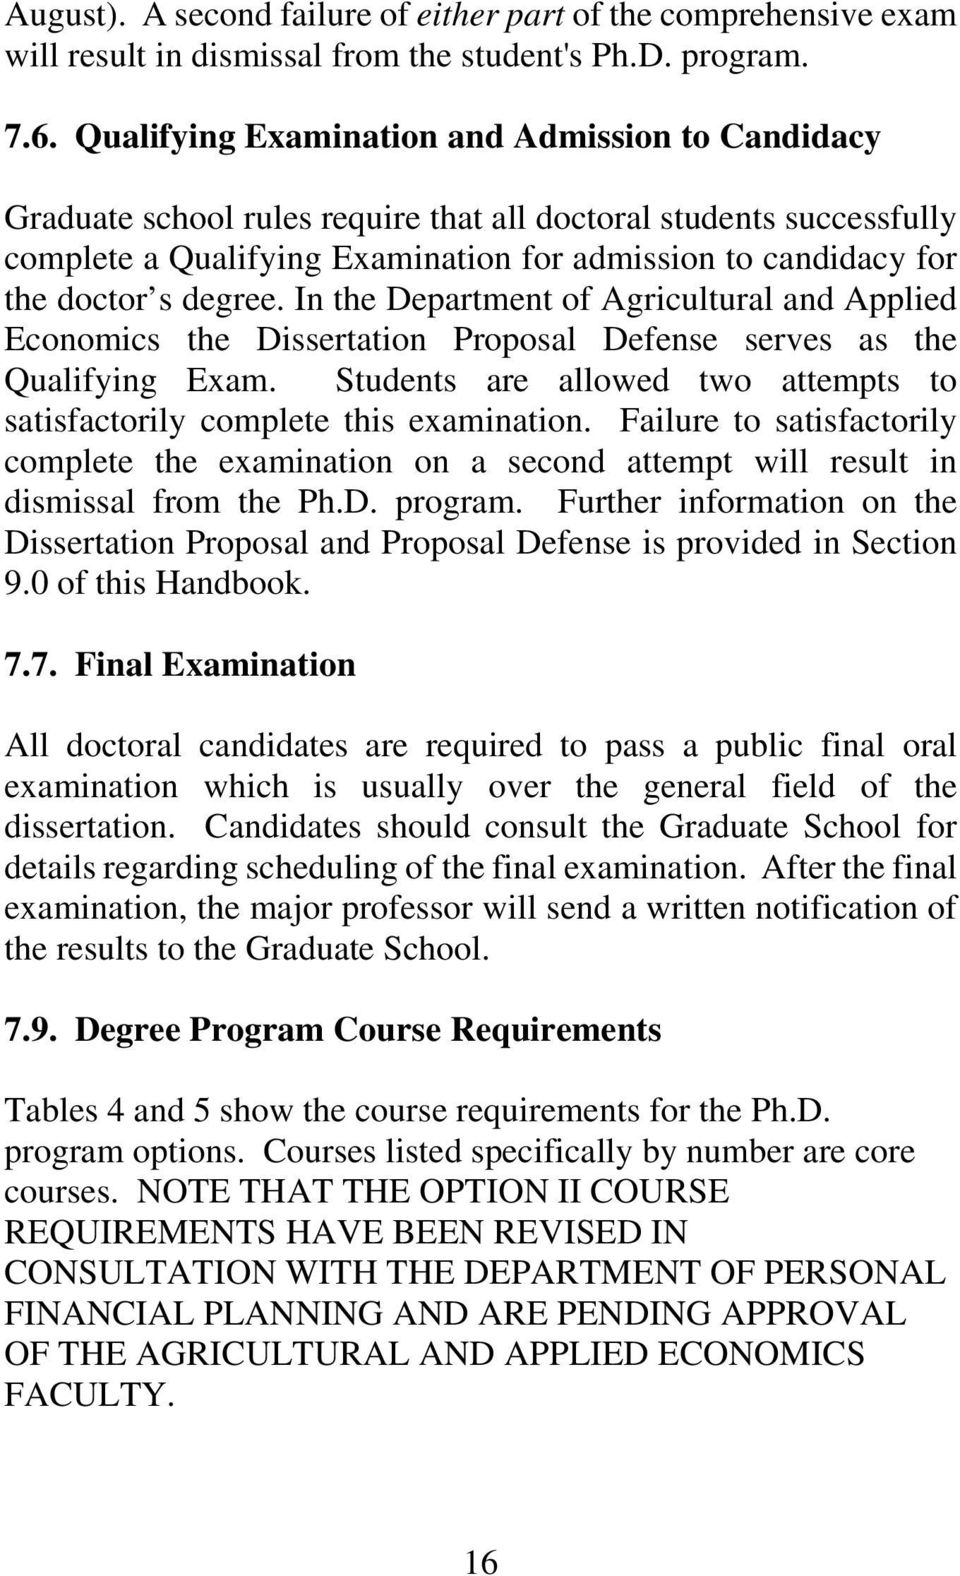 degree. In the Department of Agricultural and Applied Economics the Dissertation Proposal Defense serves as the Qualifying Exam.